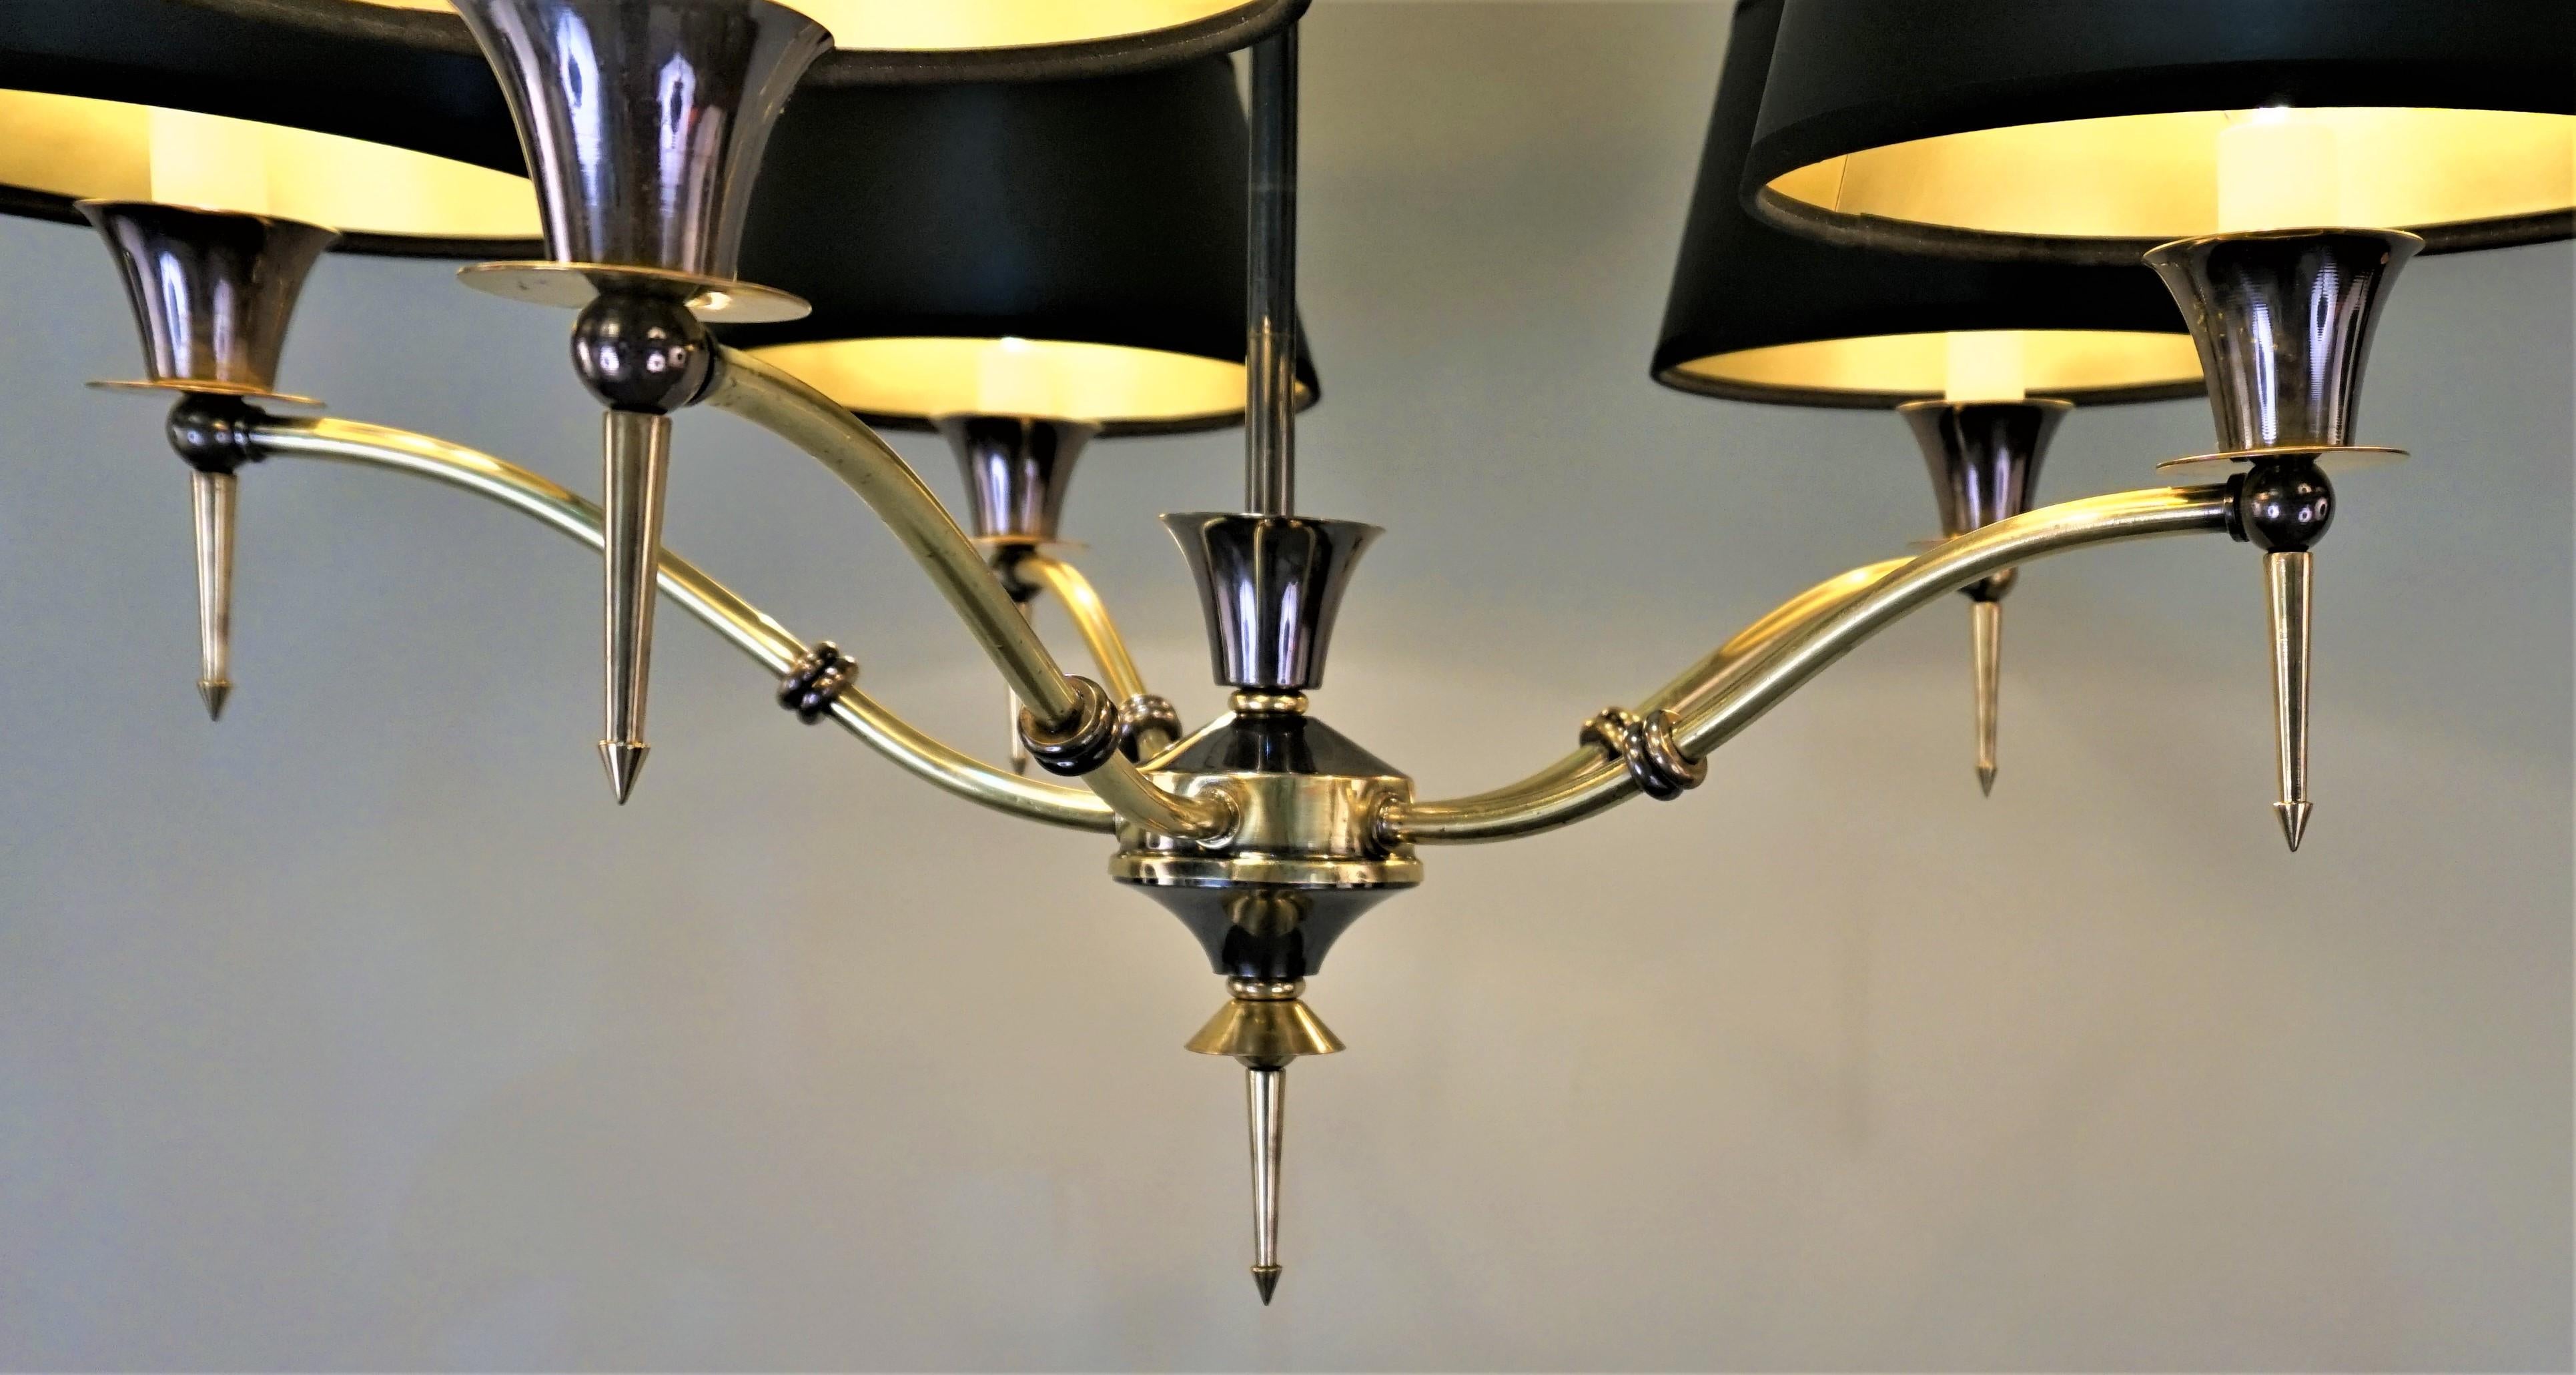 Midcentury five-light two color bronze chandelier with black lampshades
60 watt max each light.